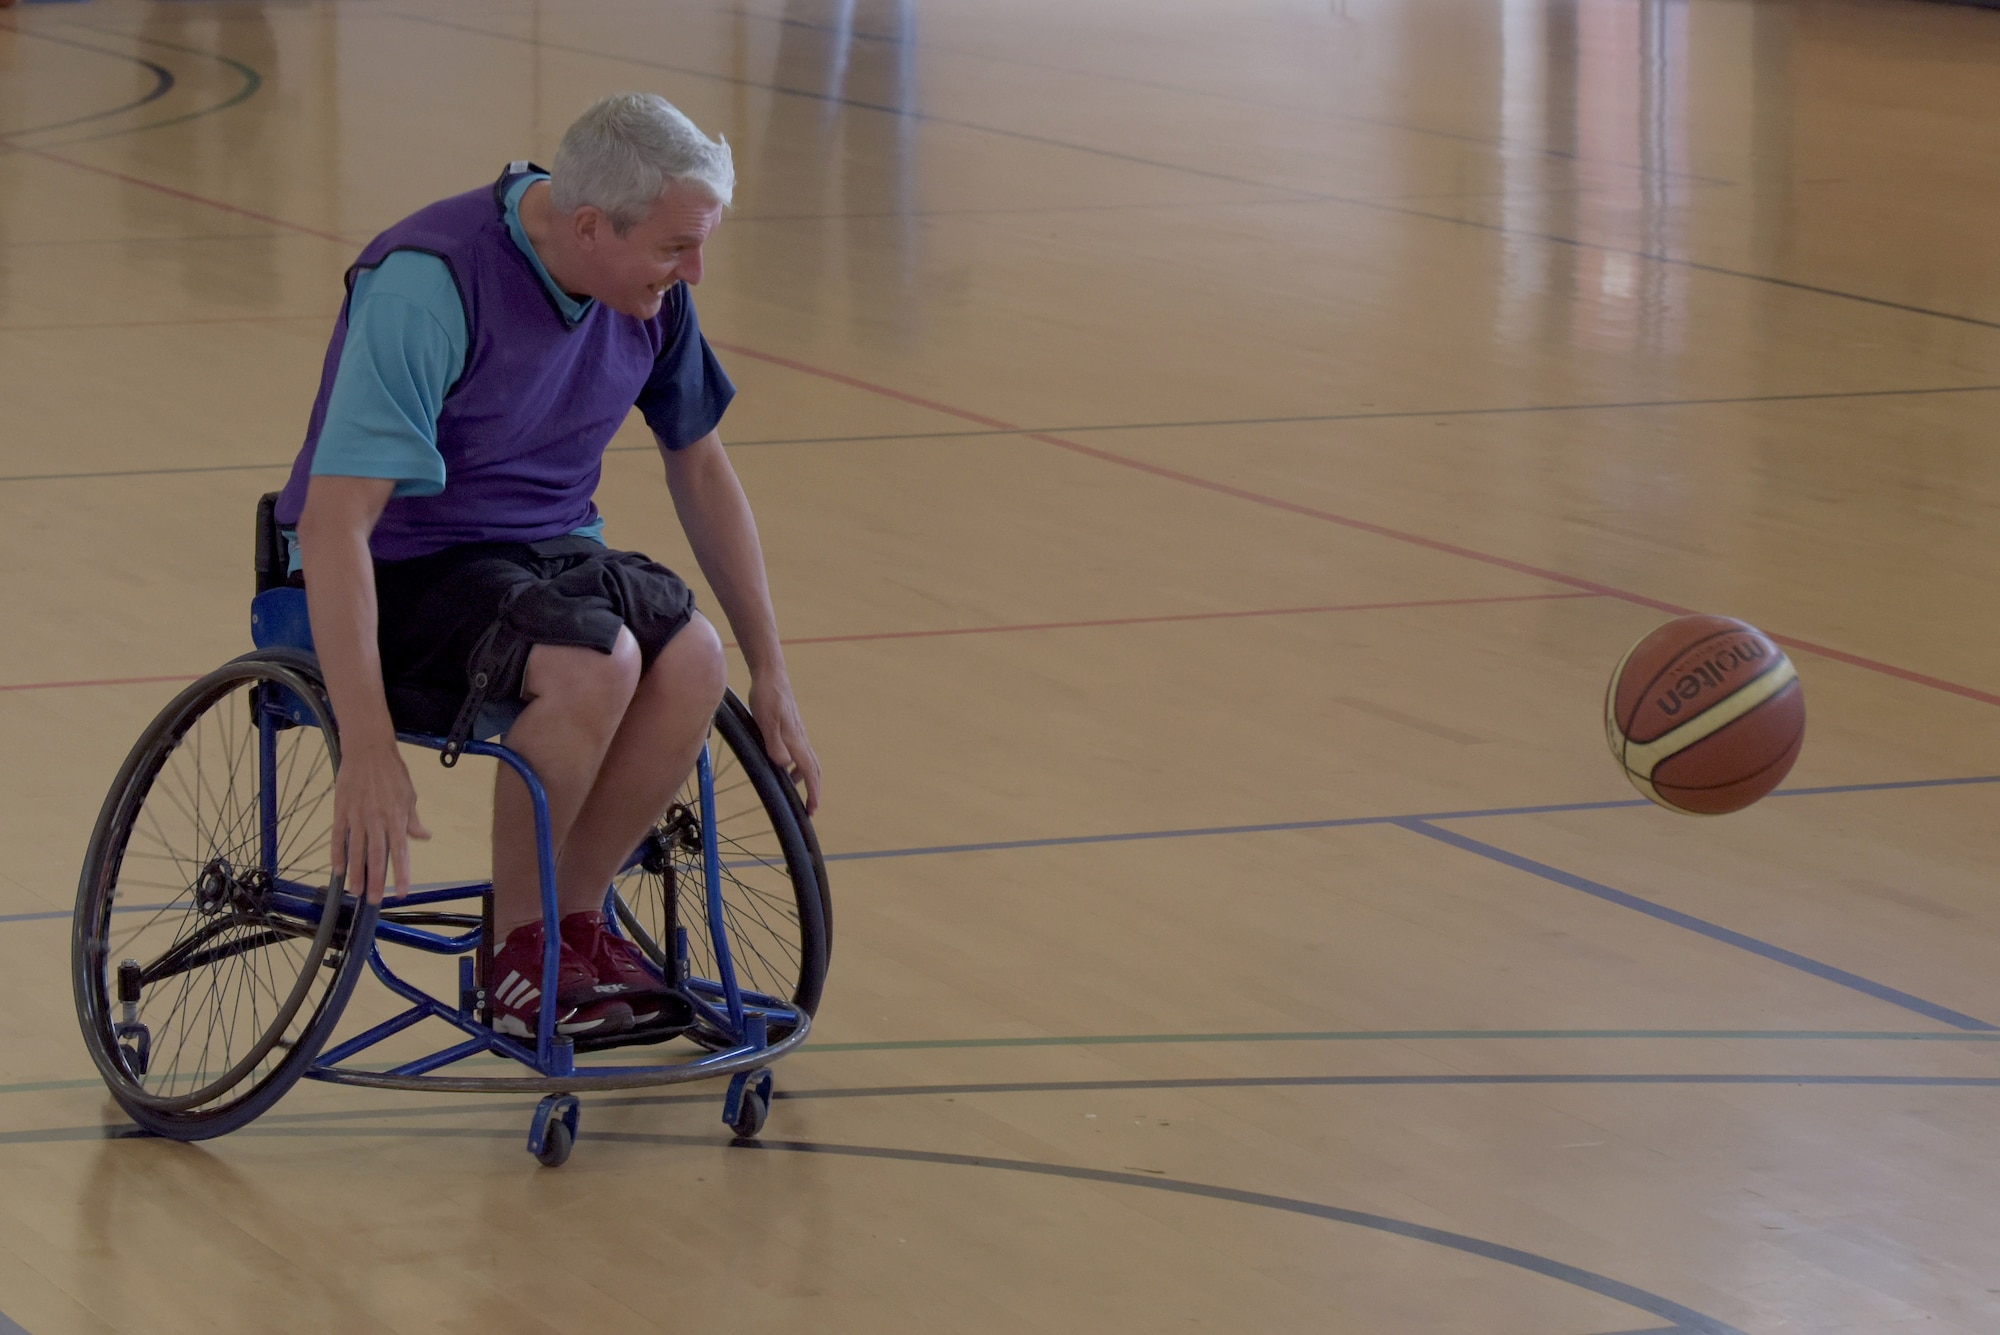 Chris Malloy, a member of the Hereward Heat wheelchair basketball club, chases a basketball during a wheelchair basketball event at RAF Mildenhall, England, Oct. 30, 2019. The event was part of National Disability Employment Awareness Month which aims to help increase employment and advancement opportunities for those with disabilities through awareness. (U.S. Air Force photo by Senior Airman Benjamin Cooper)